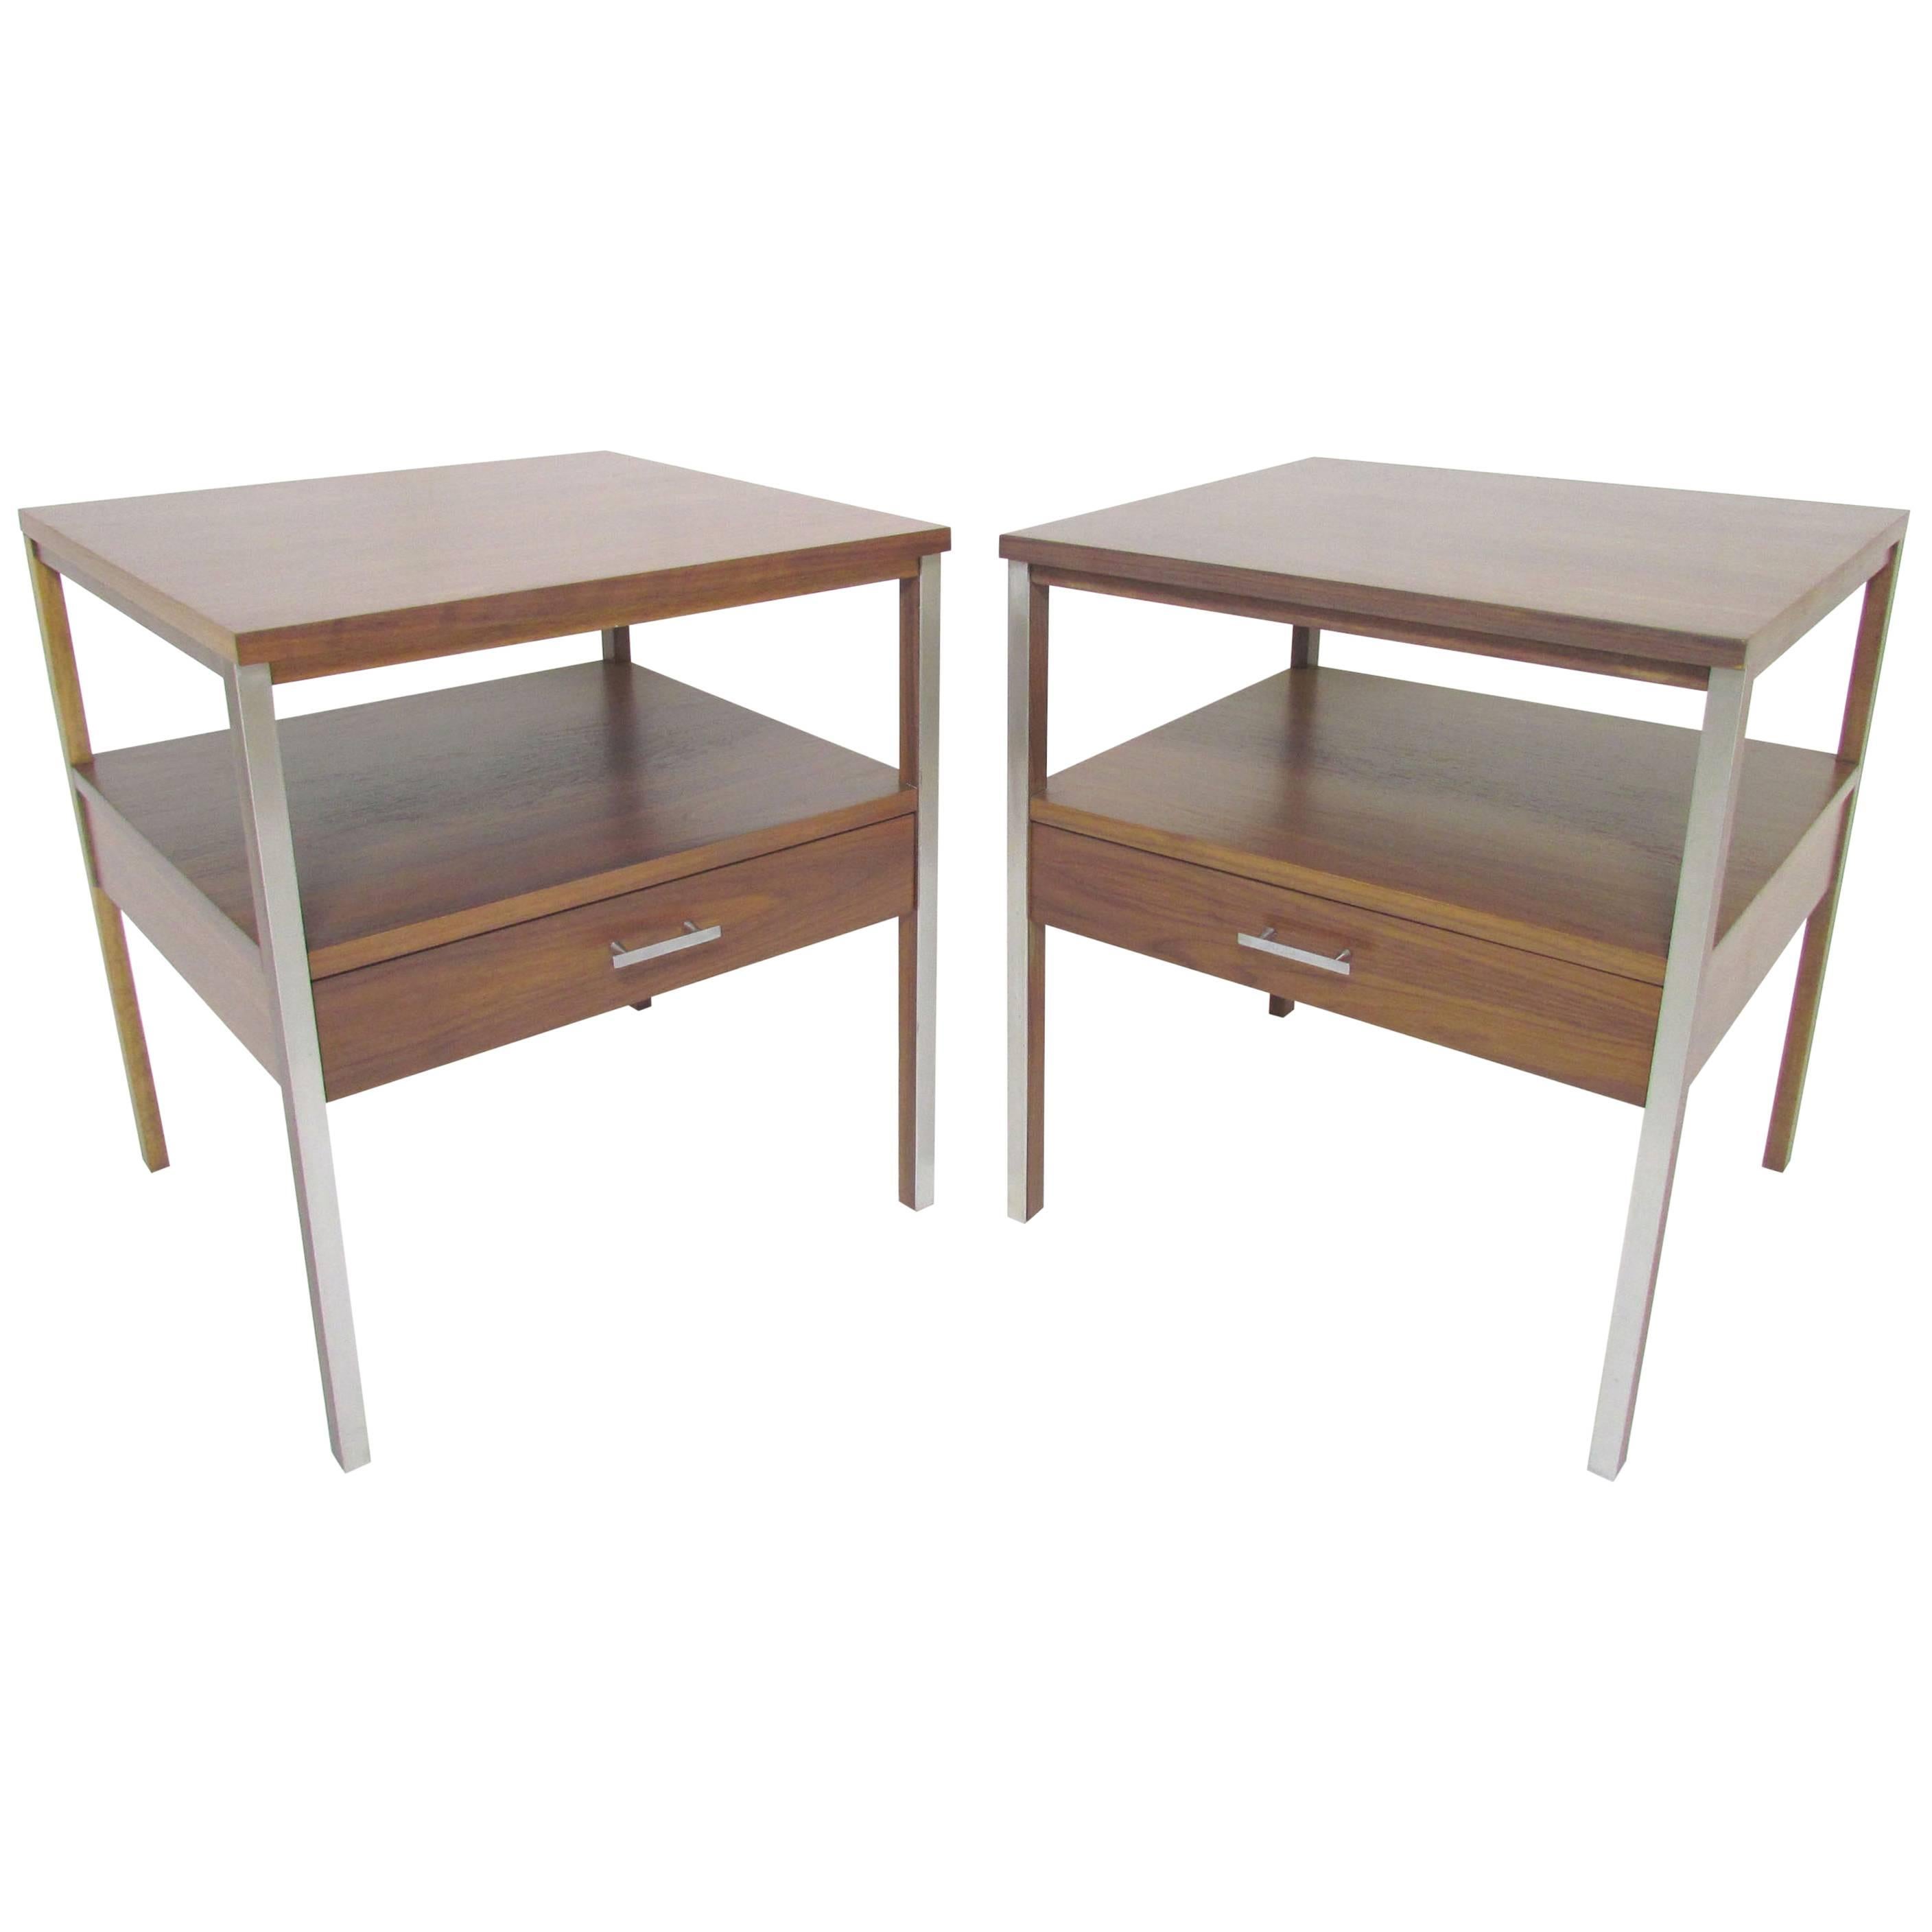 Pair of End Tables or Nightstands by Paul McCobb for Calvin, circa 1950s